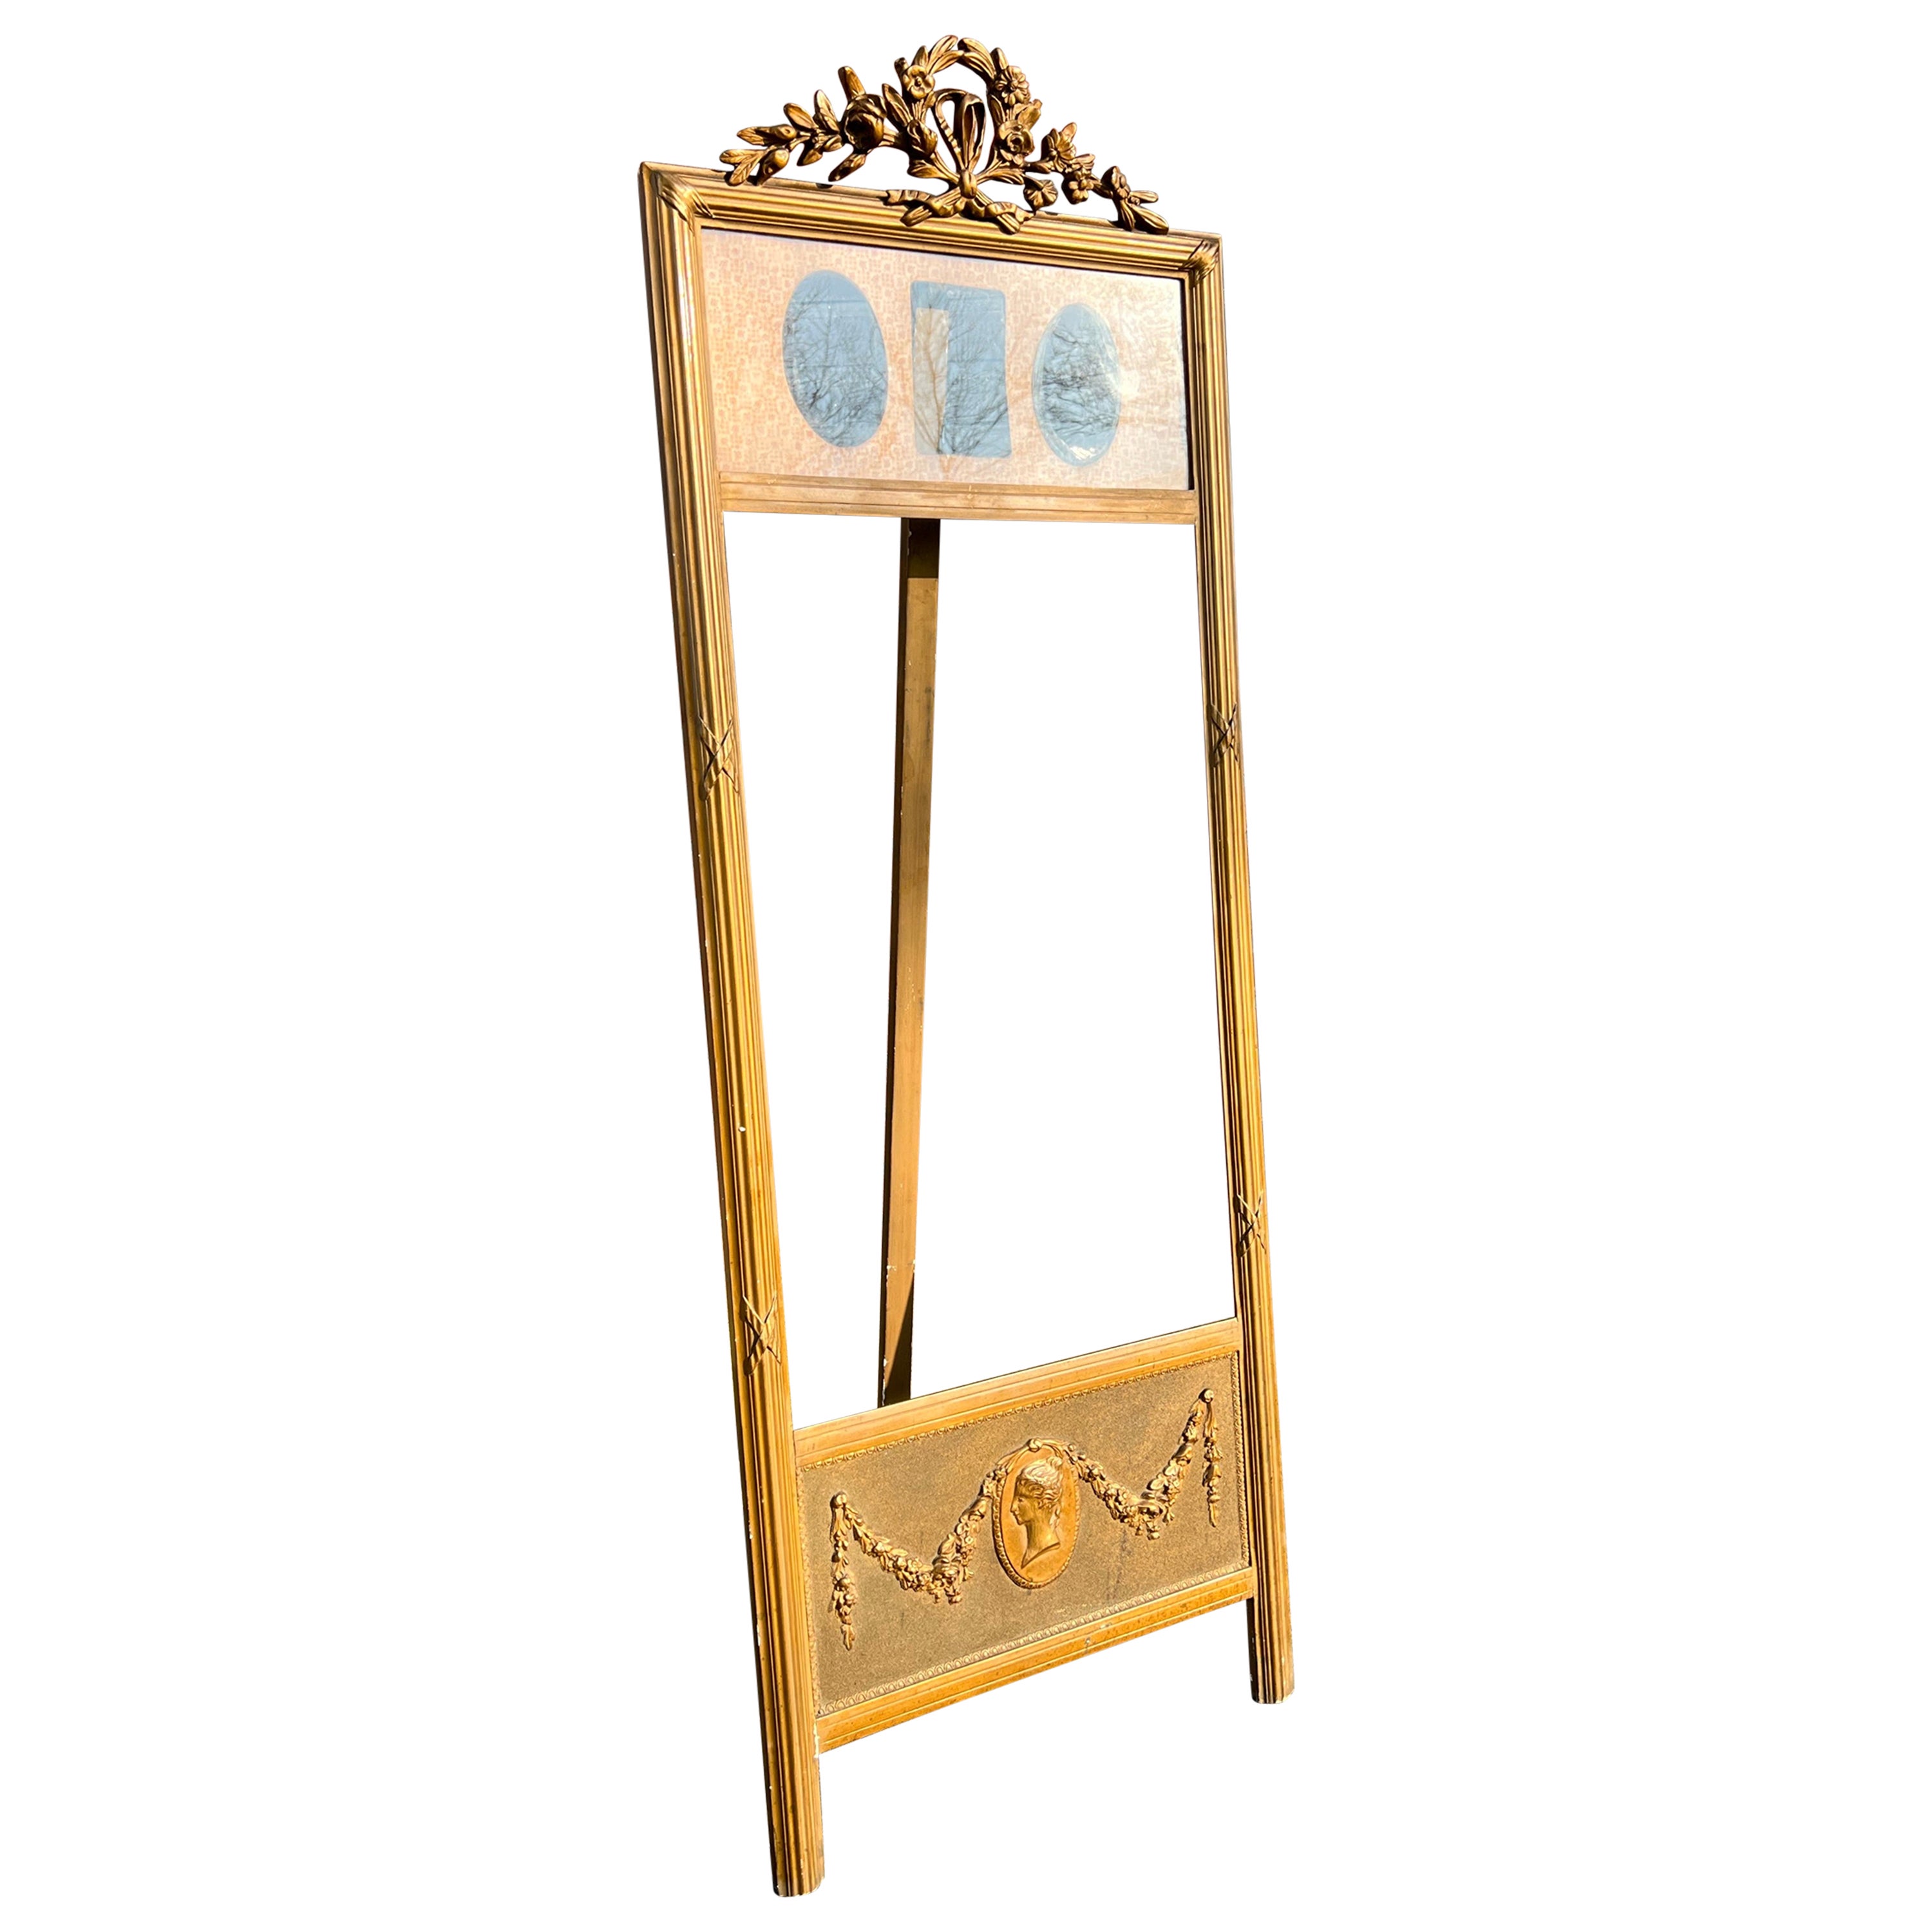 Rare Antique Gilt Wooden Mirror or Picture Floor Easel / Display Stand, 1900s For Sale